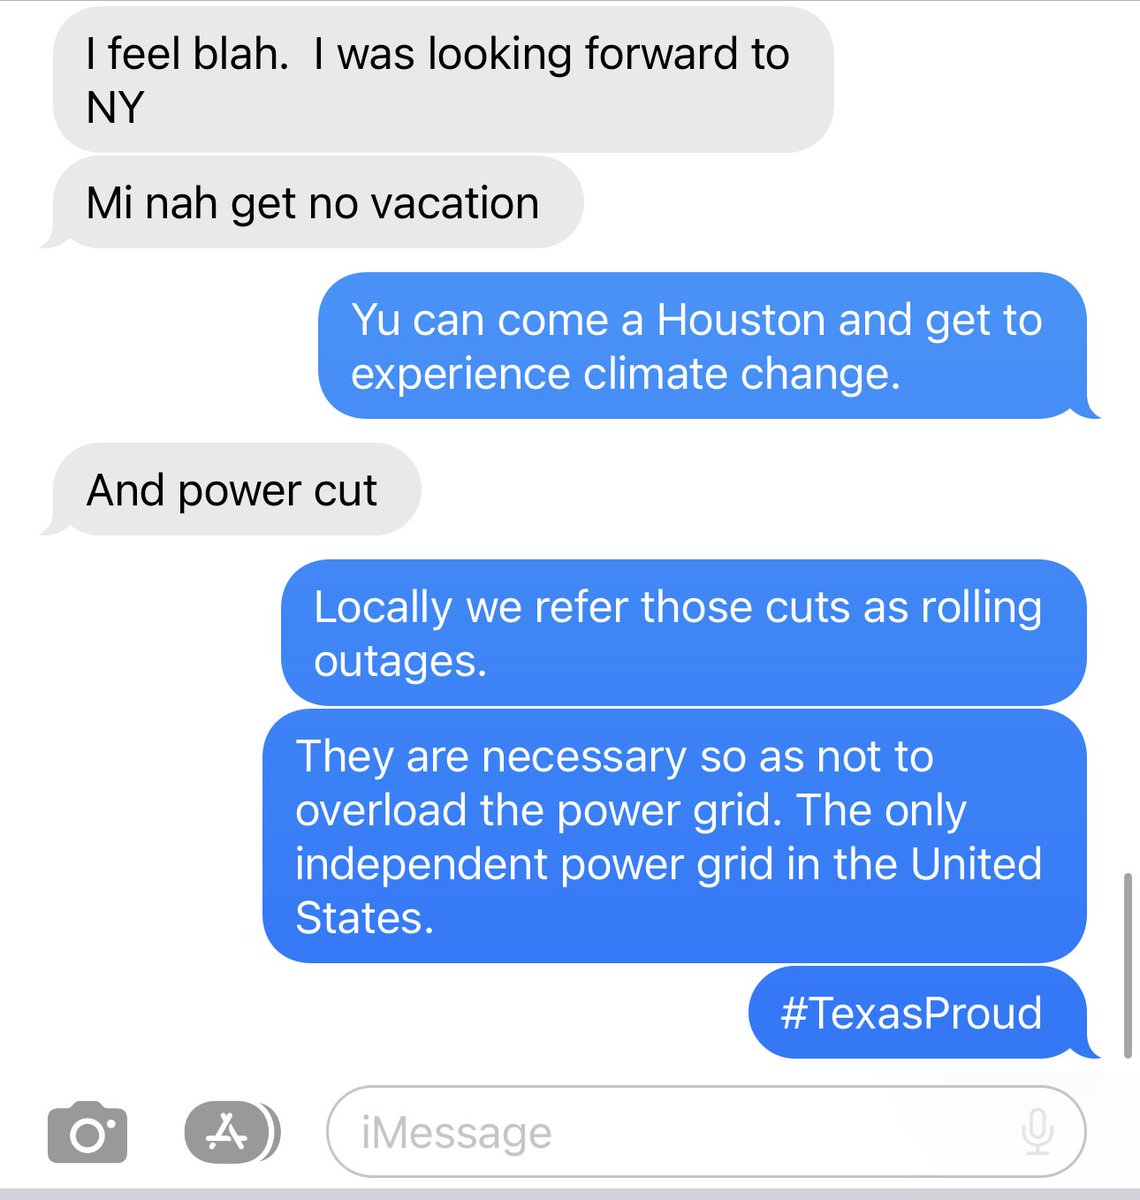 It’s all about how you word your response. It’s not excessive heat, it’s climate change. It’s not power cuts, it’s rolling outages. #Texas #TexasPride. You are all welcome to visit.